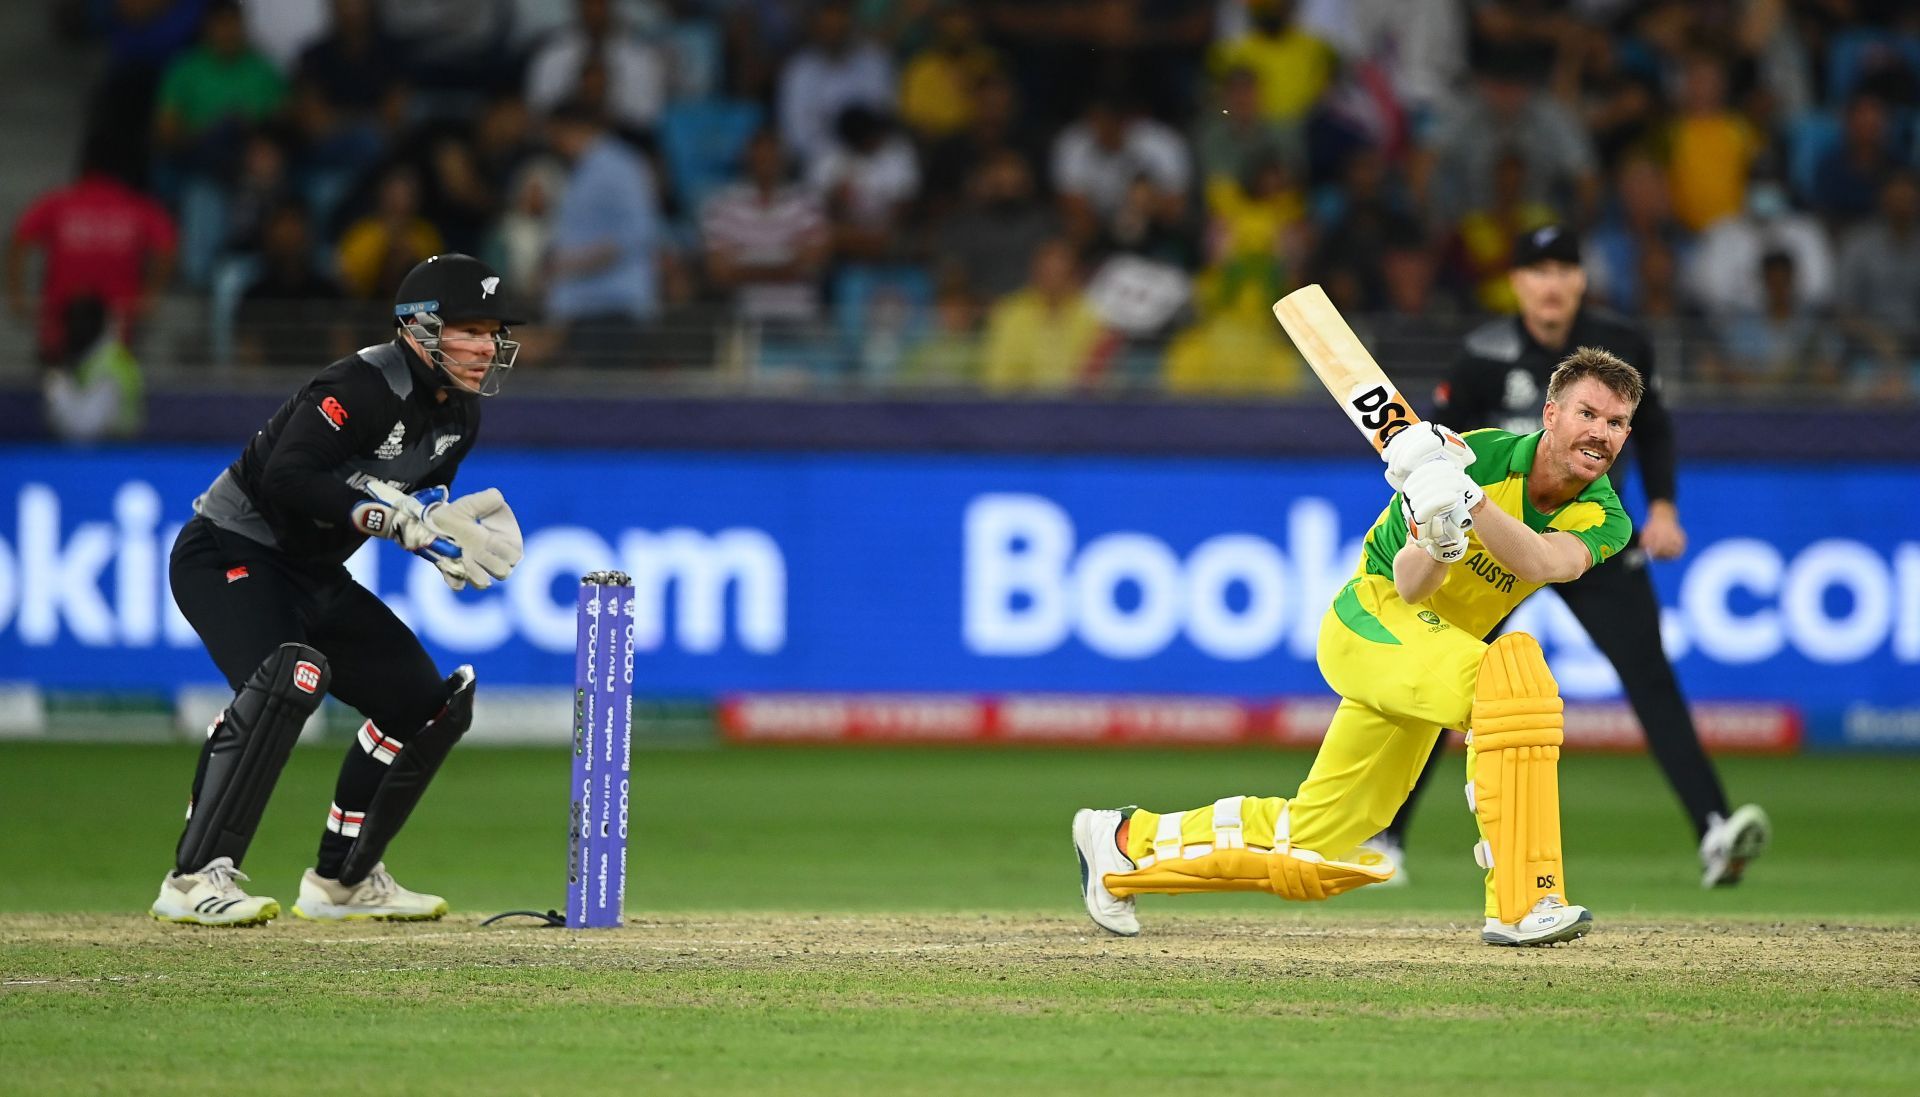 David Warner plays a shot during the T20 World Cup 2021 final. Pic: Getty Images